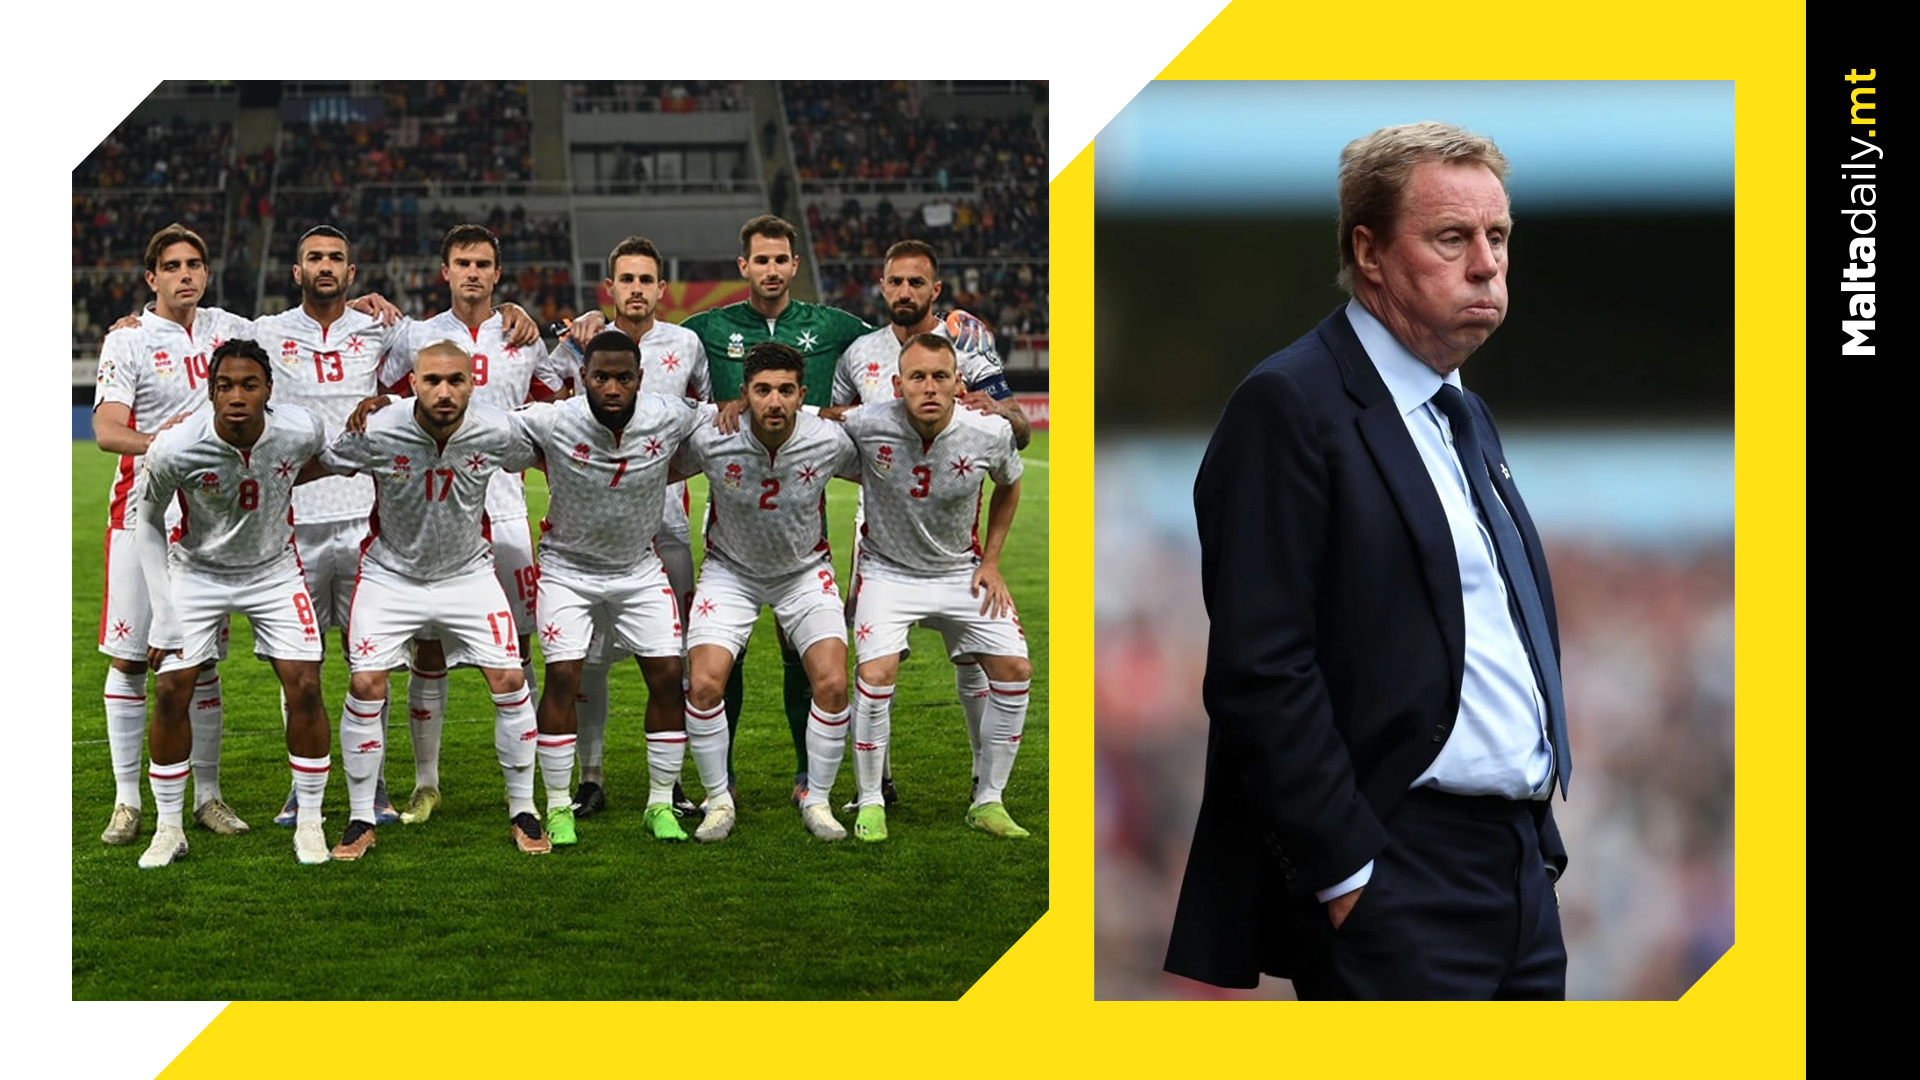 Former England manager & player Harry Redknapp pokes fun at Malta national football team